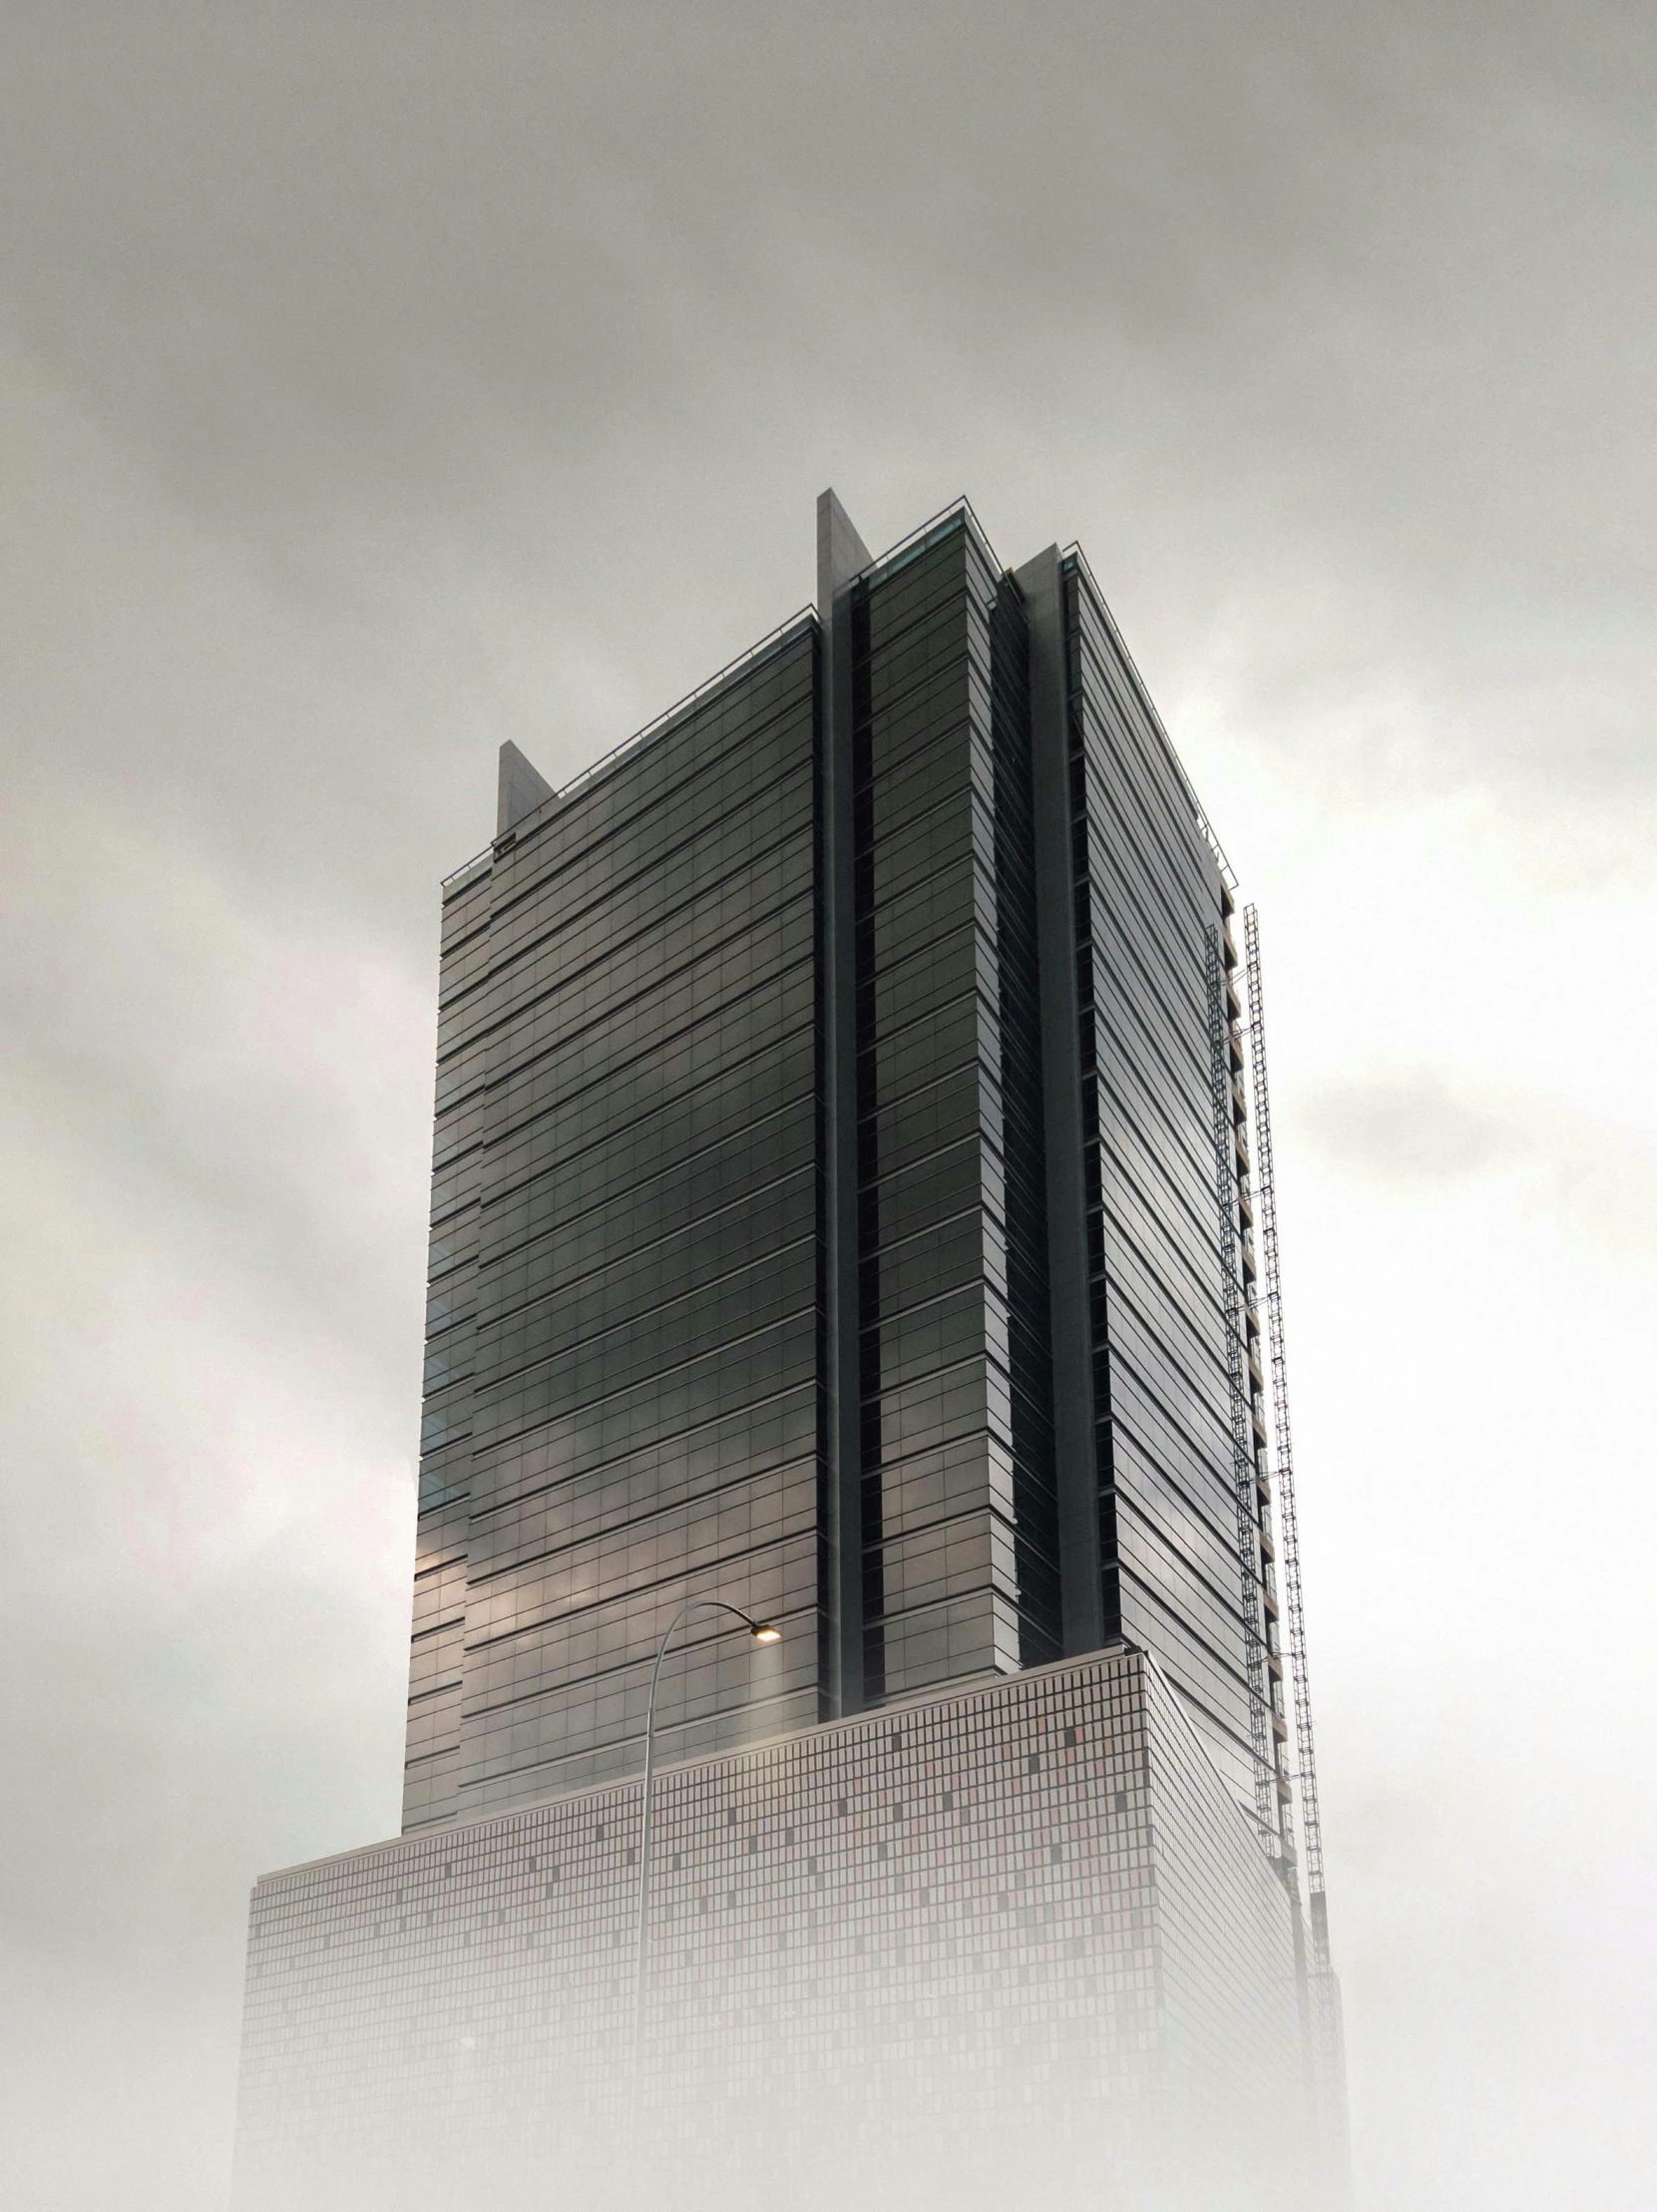 the high rise building has been designed in the design of the modern skyscr